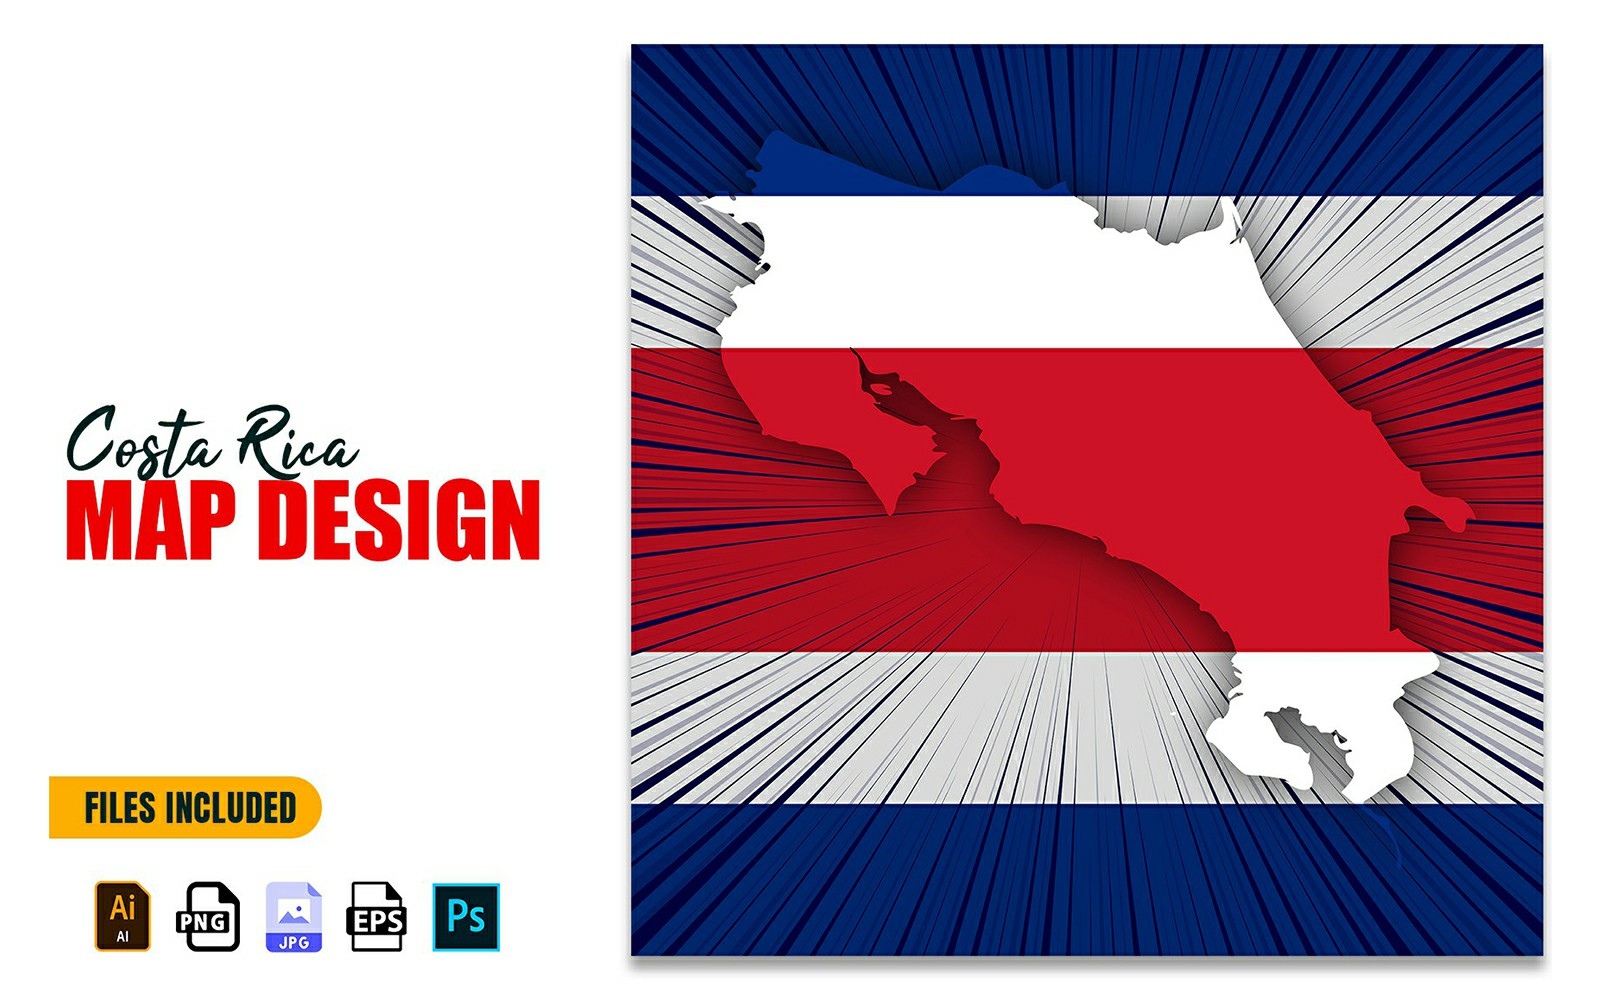 Costa Rica Independence Day Map Design Illustration